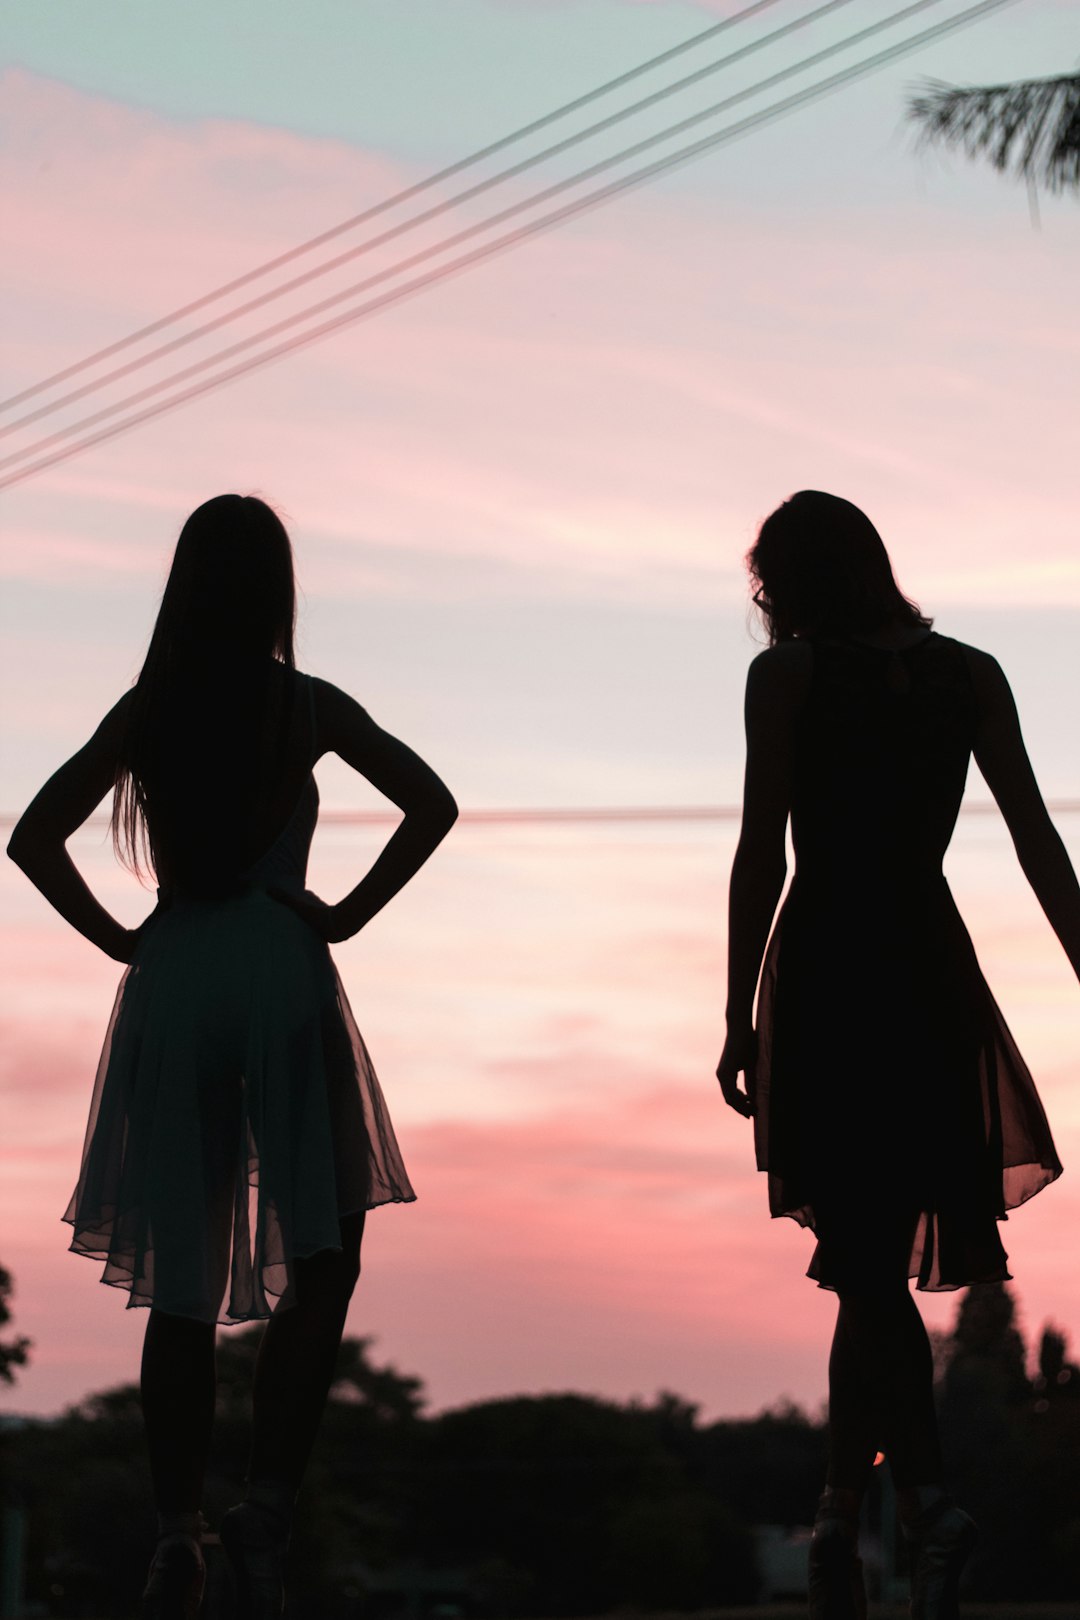 2 women in dress standing on beach during sunset